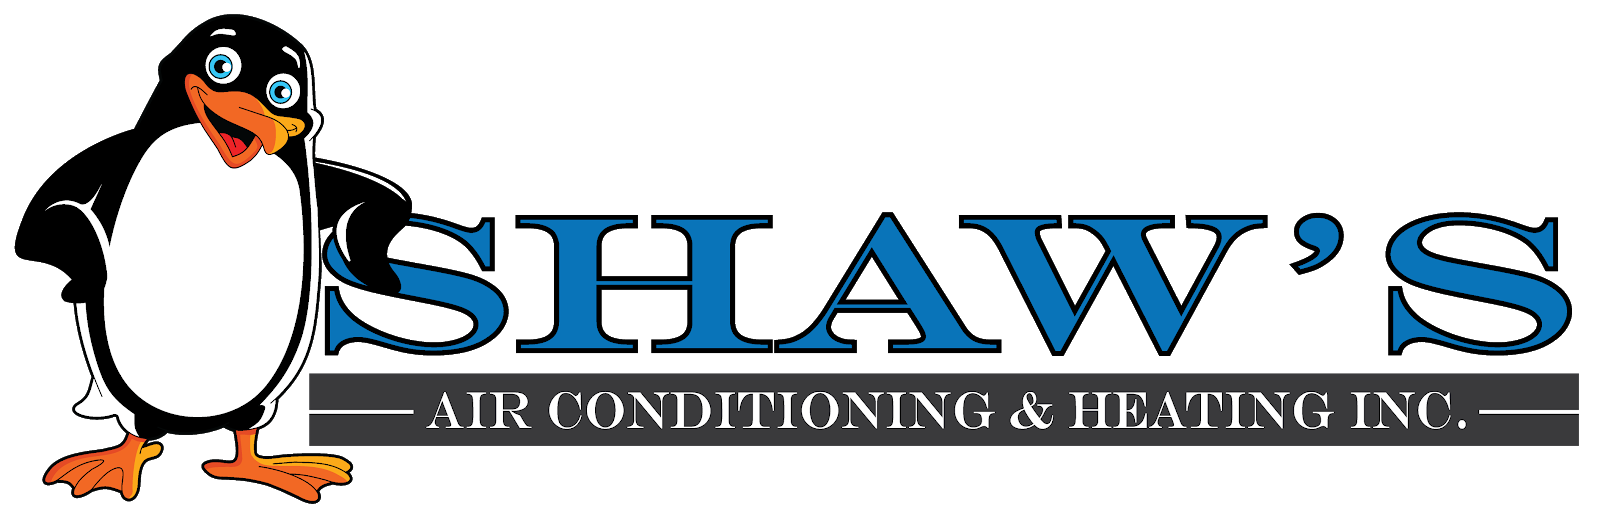 Shaws Air Conditioning & Heating